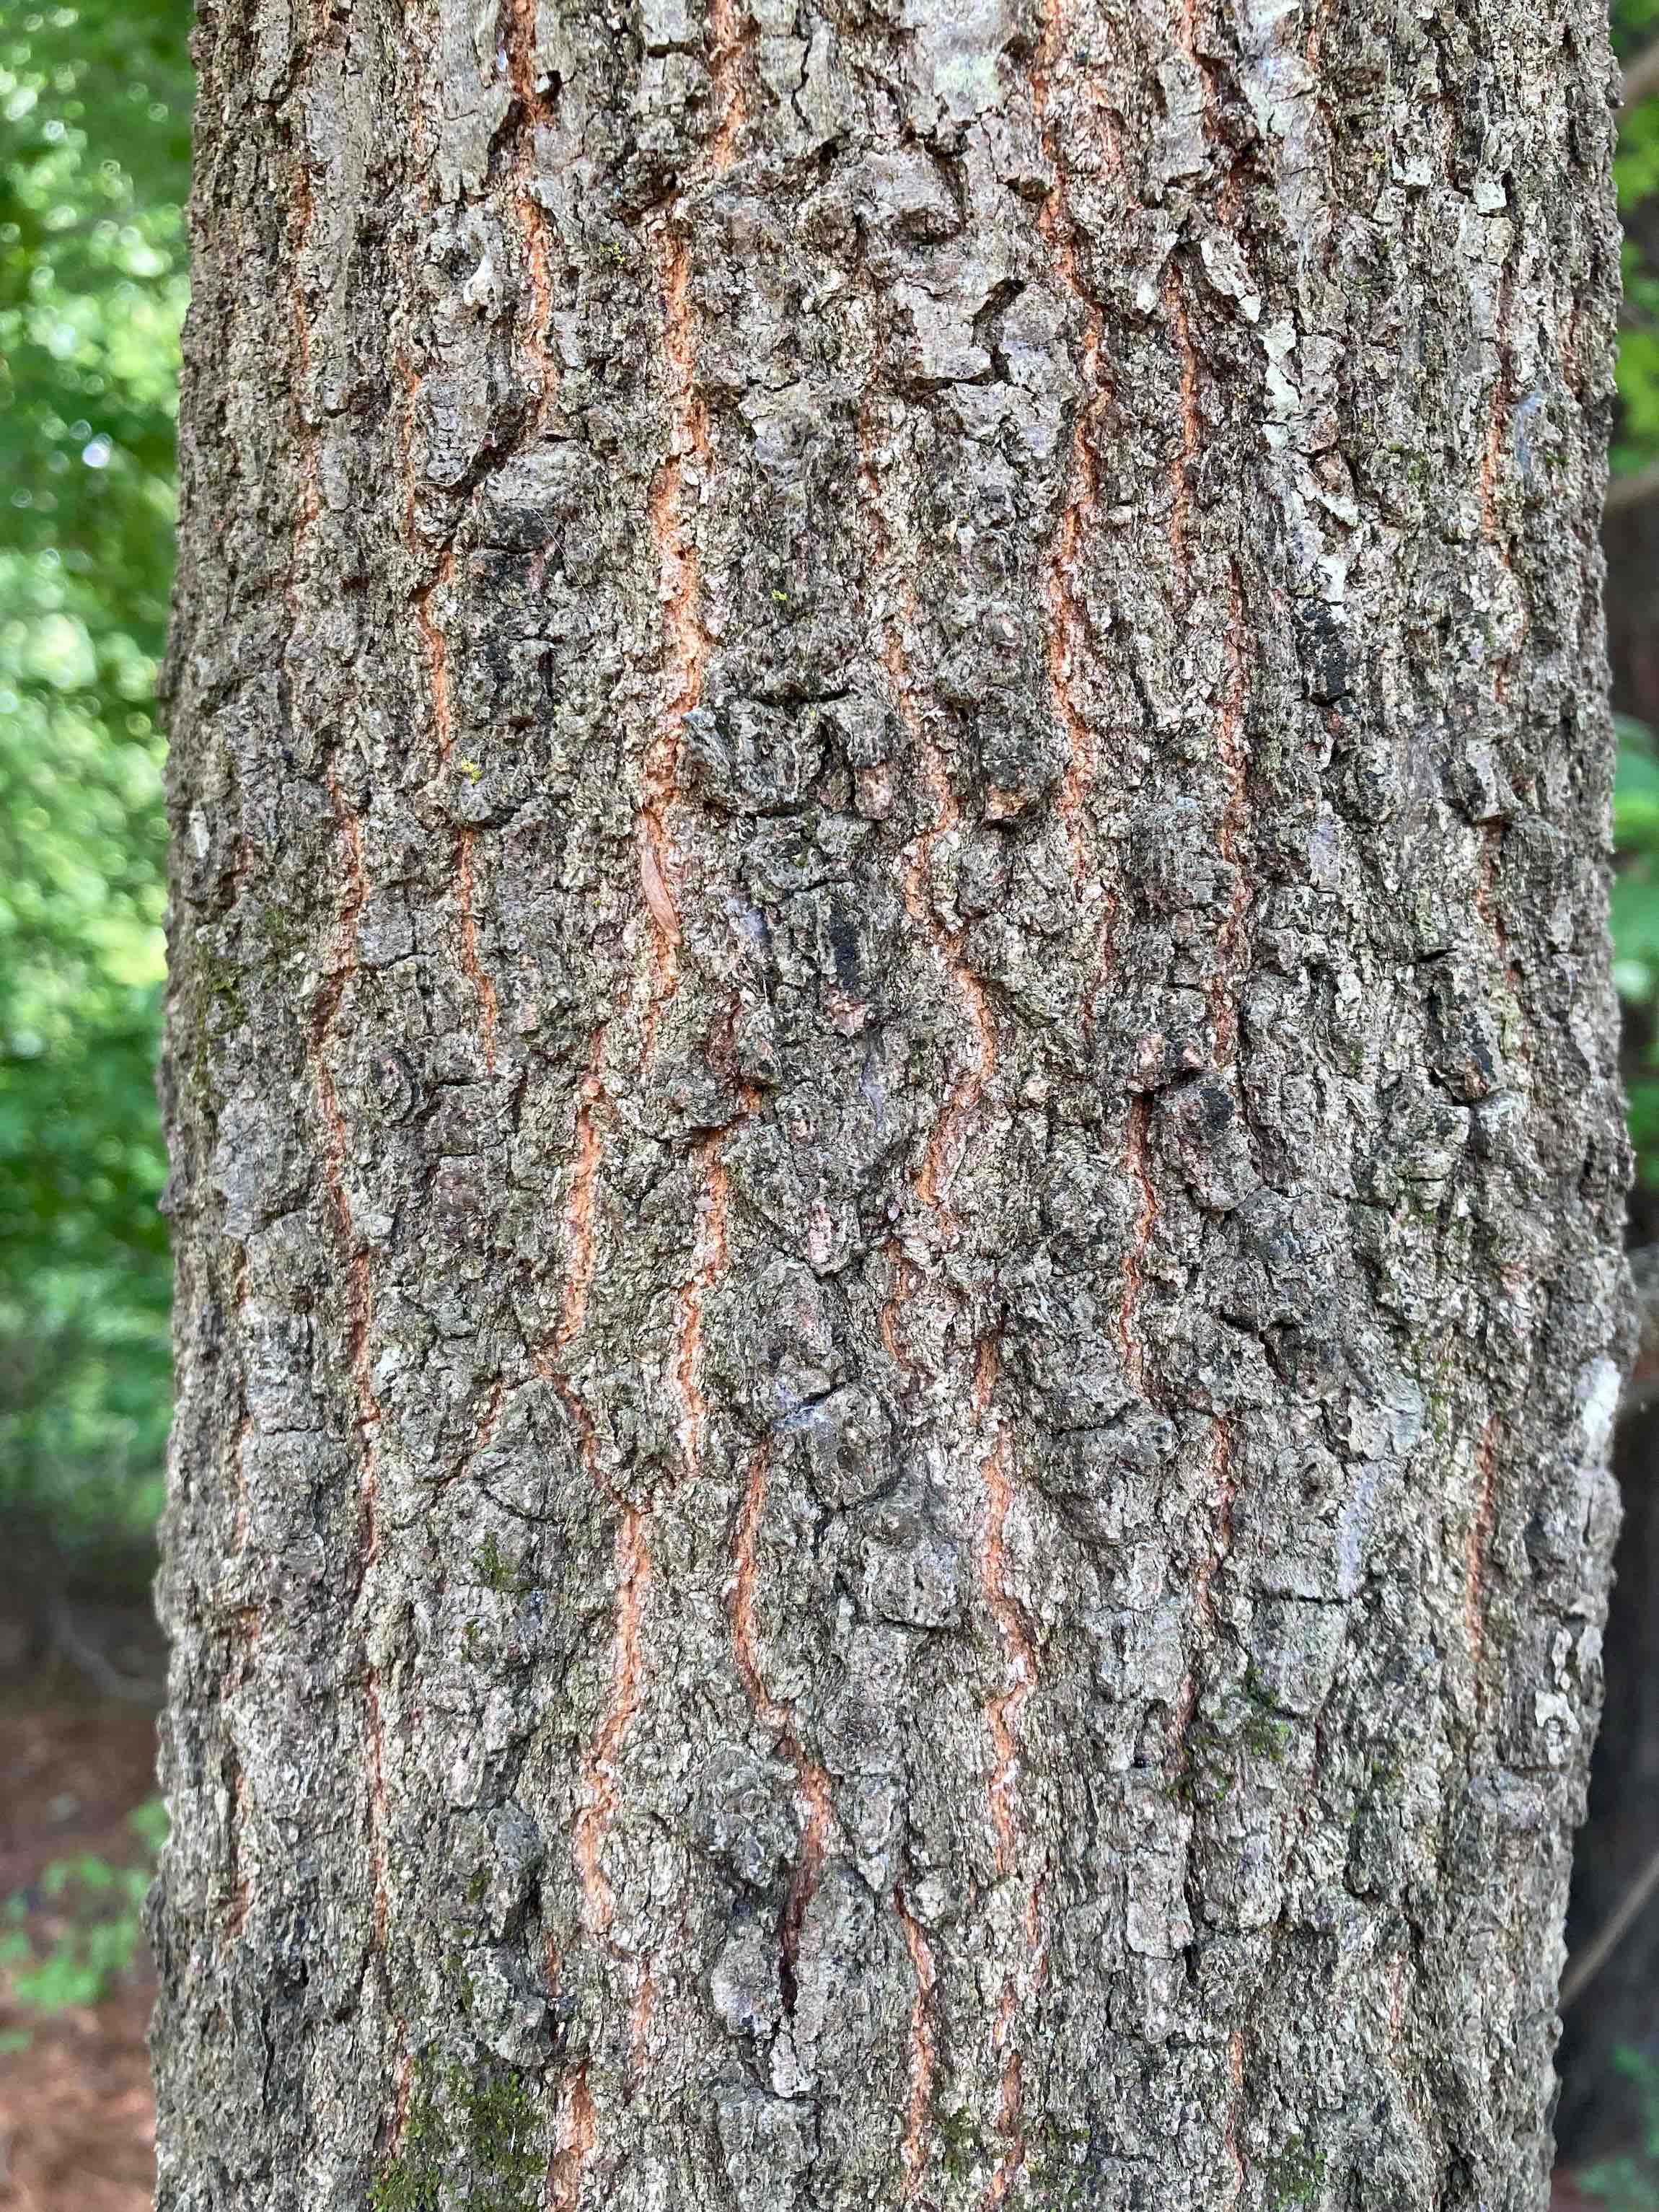 The Scientific Name is Quercus nigra. You will likely hear them called Water Oak, Paddle Oak. This picture shows the Bark on mature tree with reddish vertical furrows. of Quercus nigra